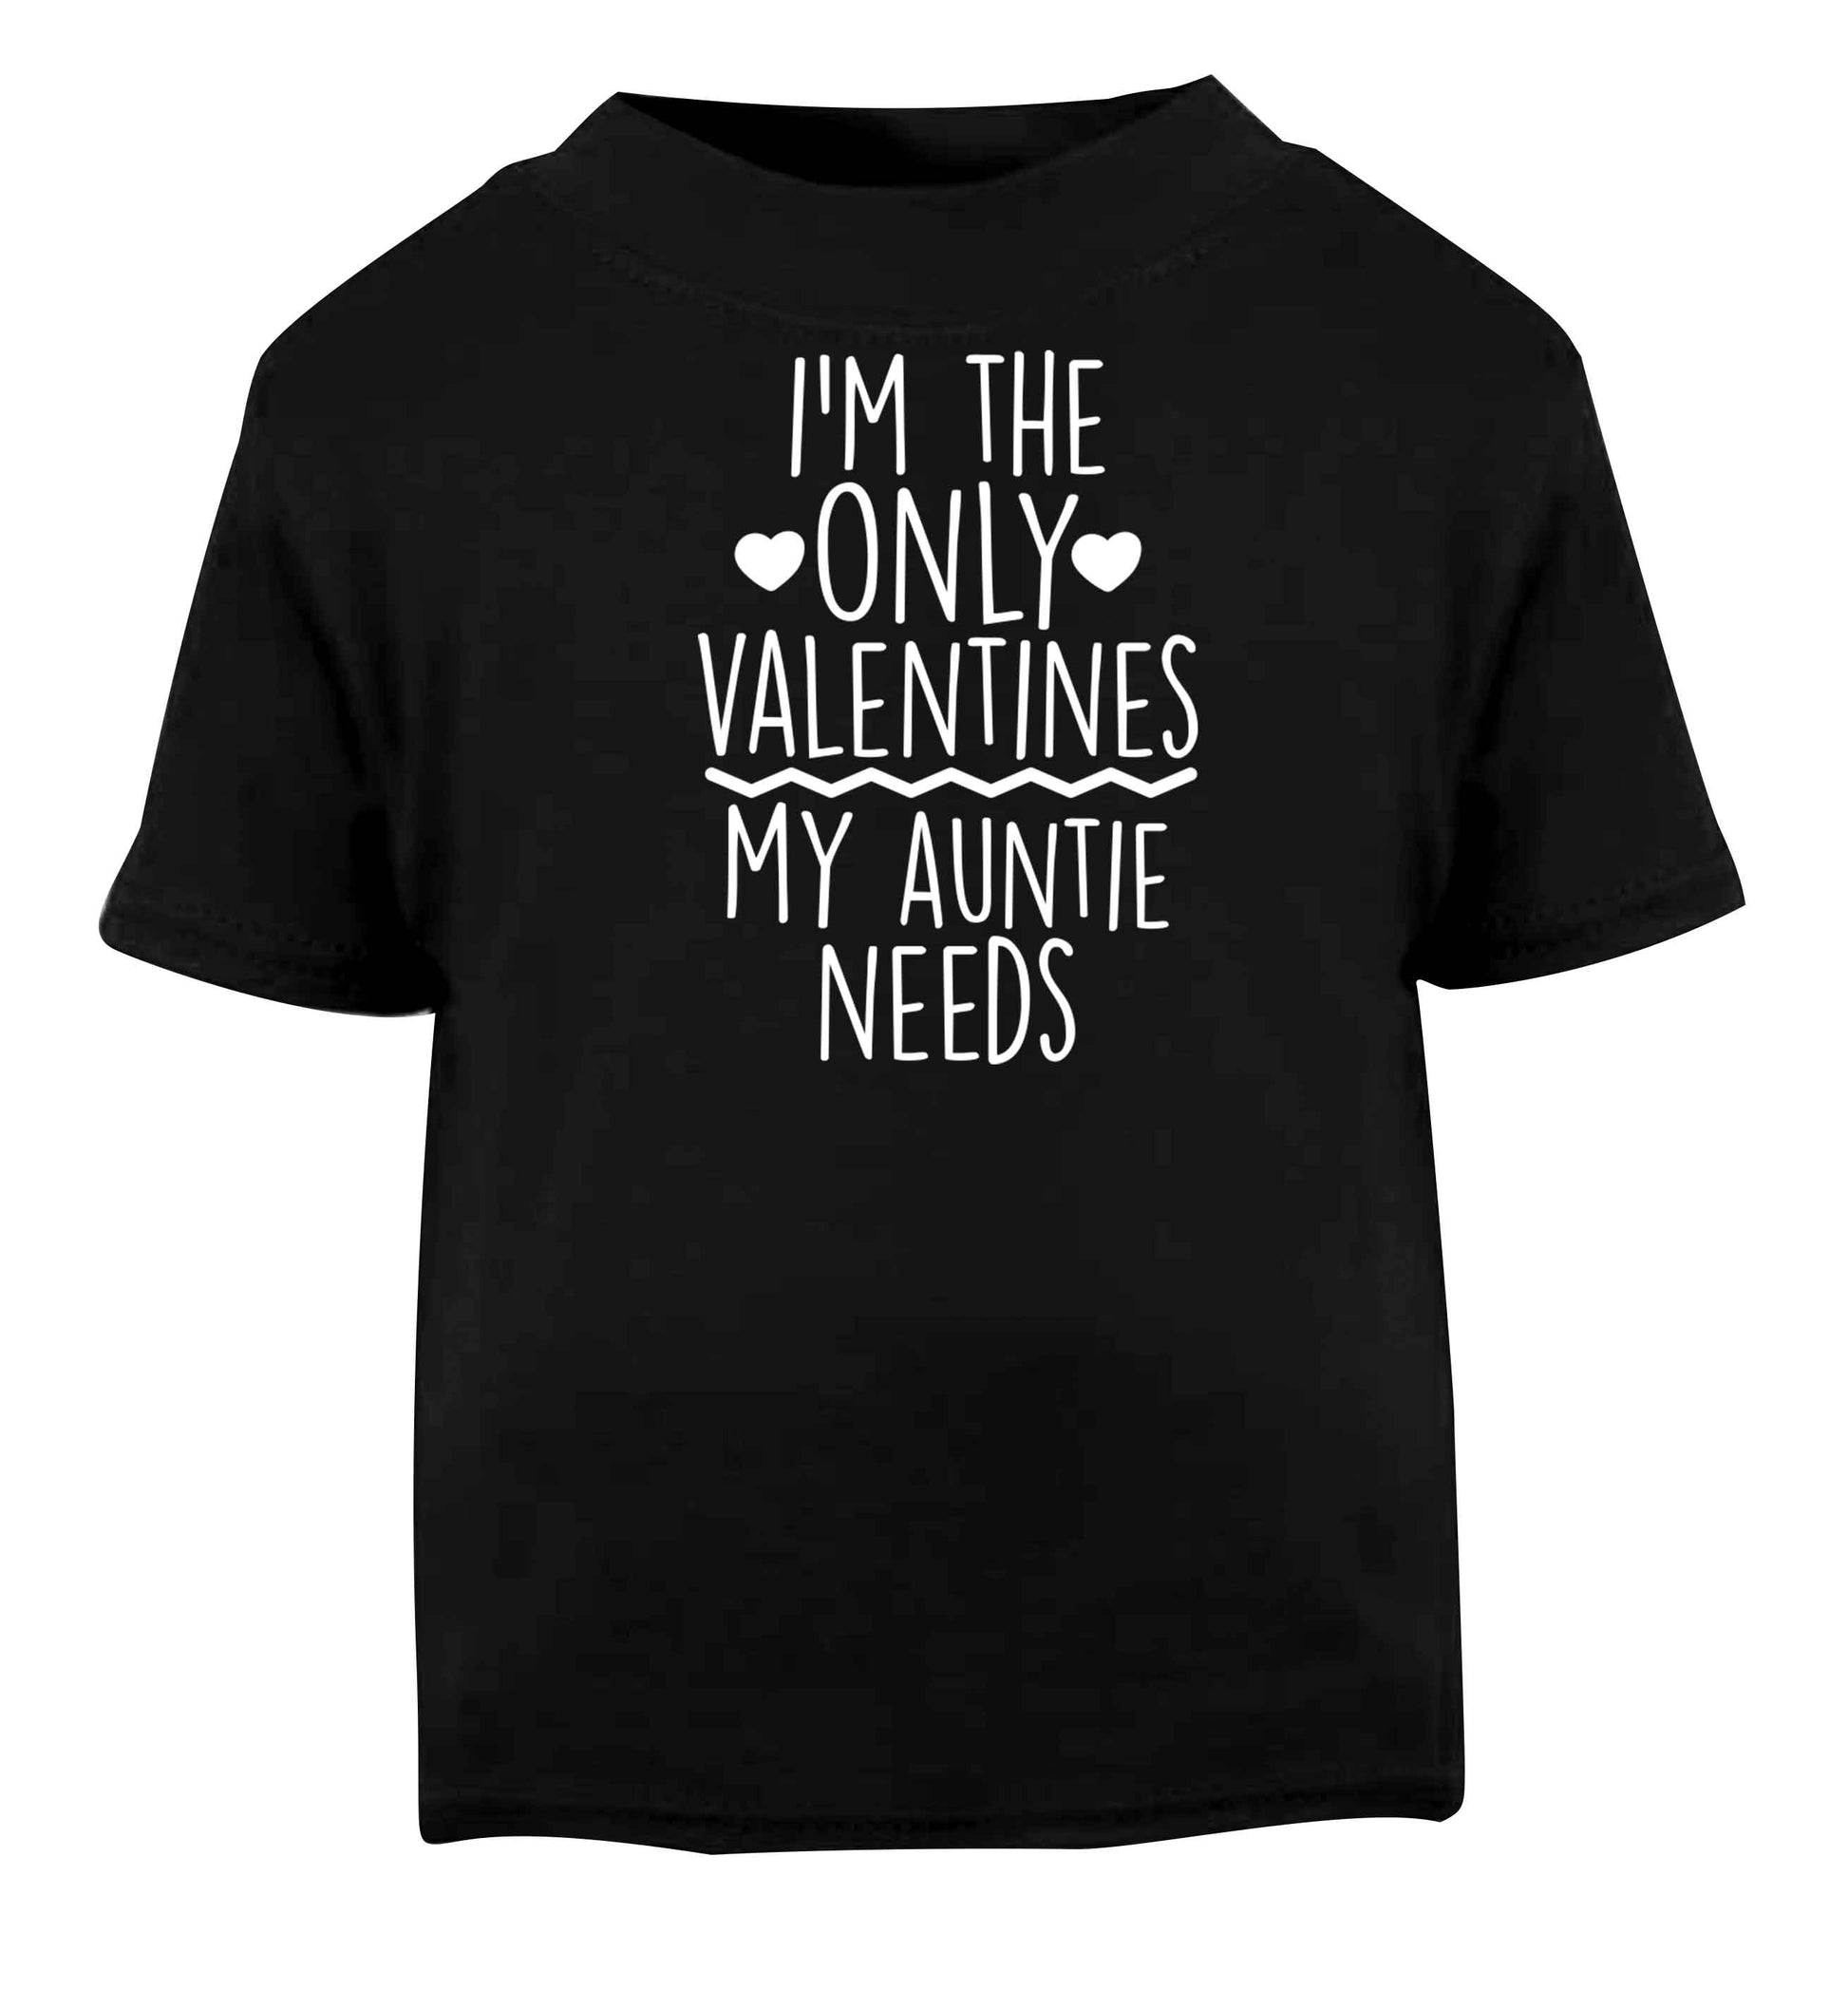 I'm the only valentines my auntie needs Black baby toddler Tshirt 2 years